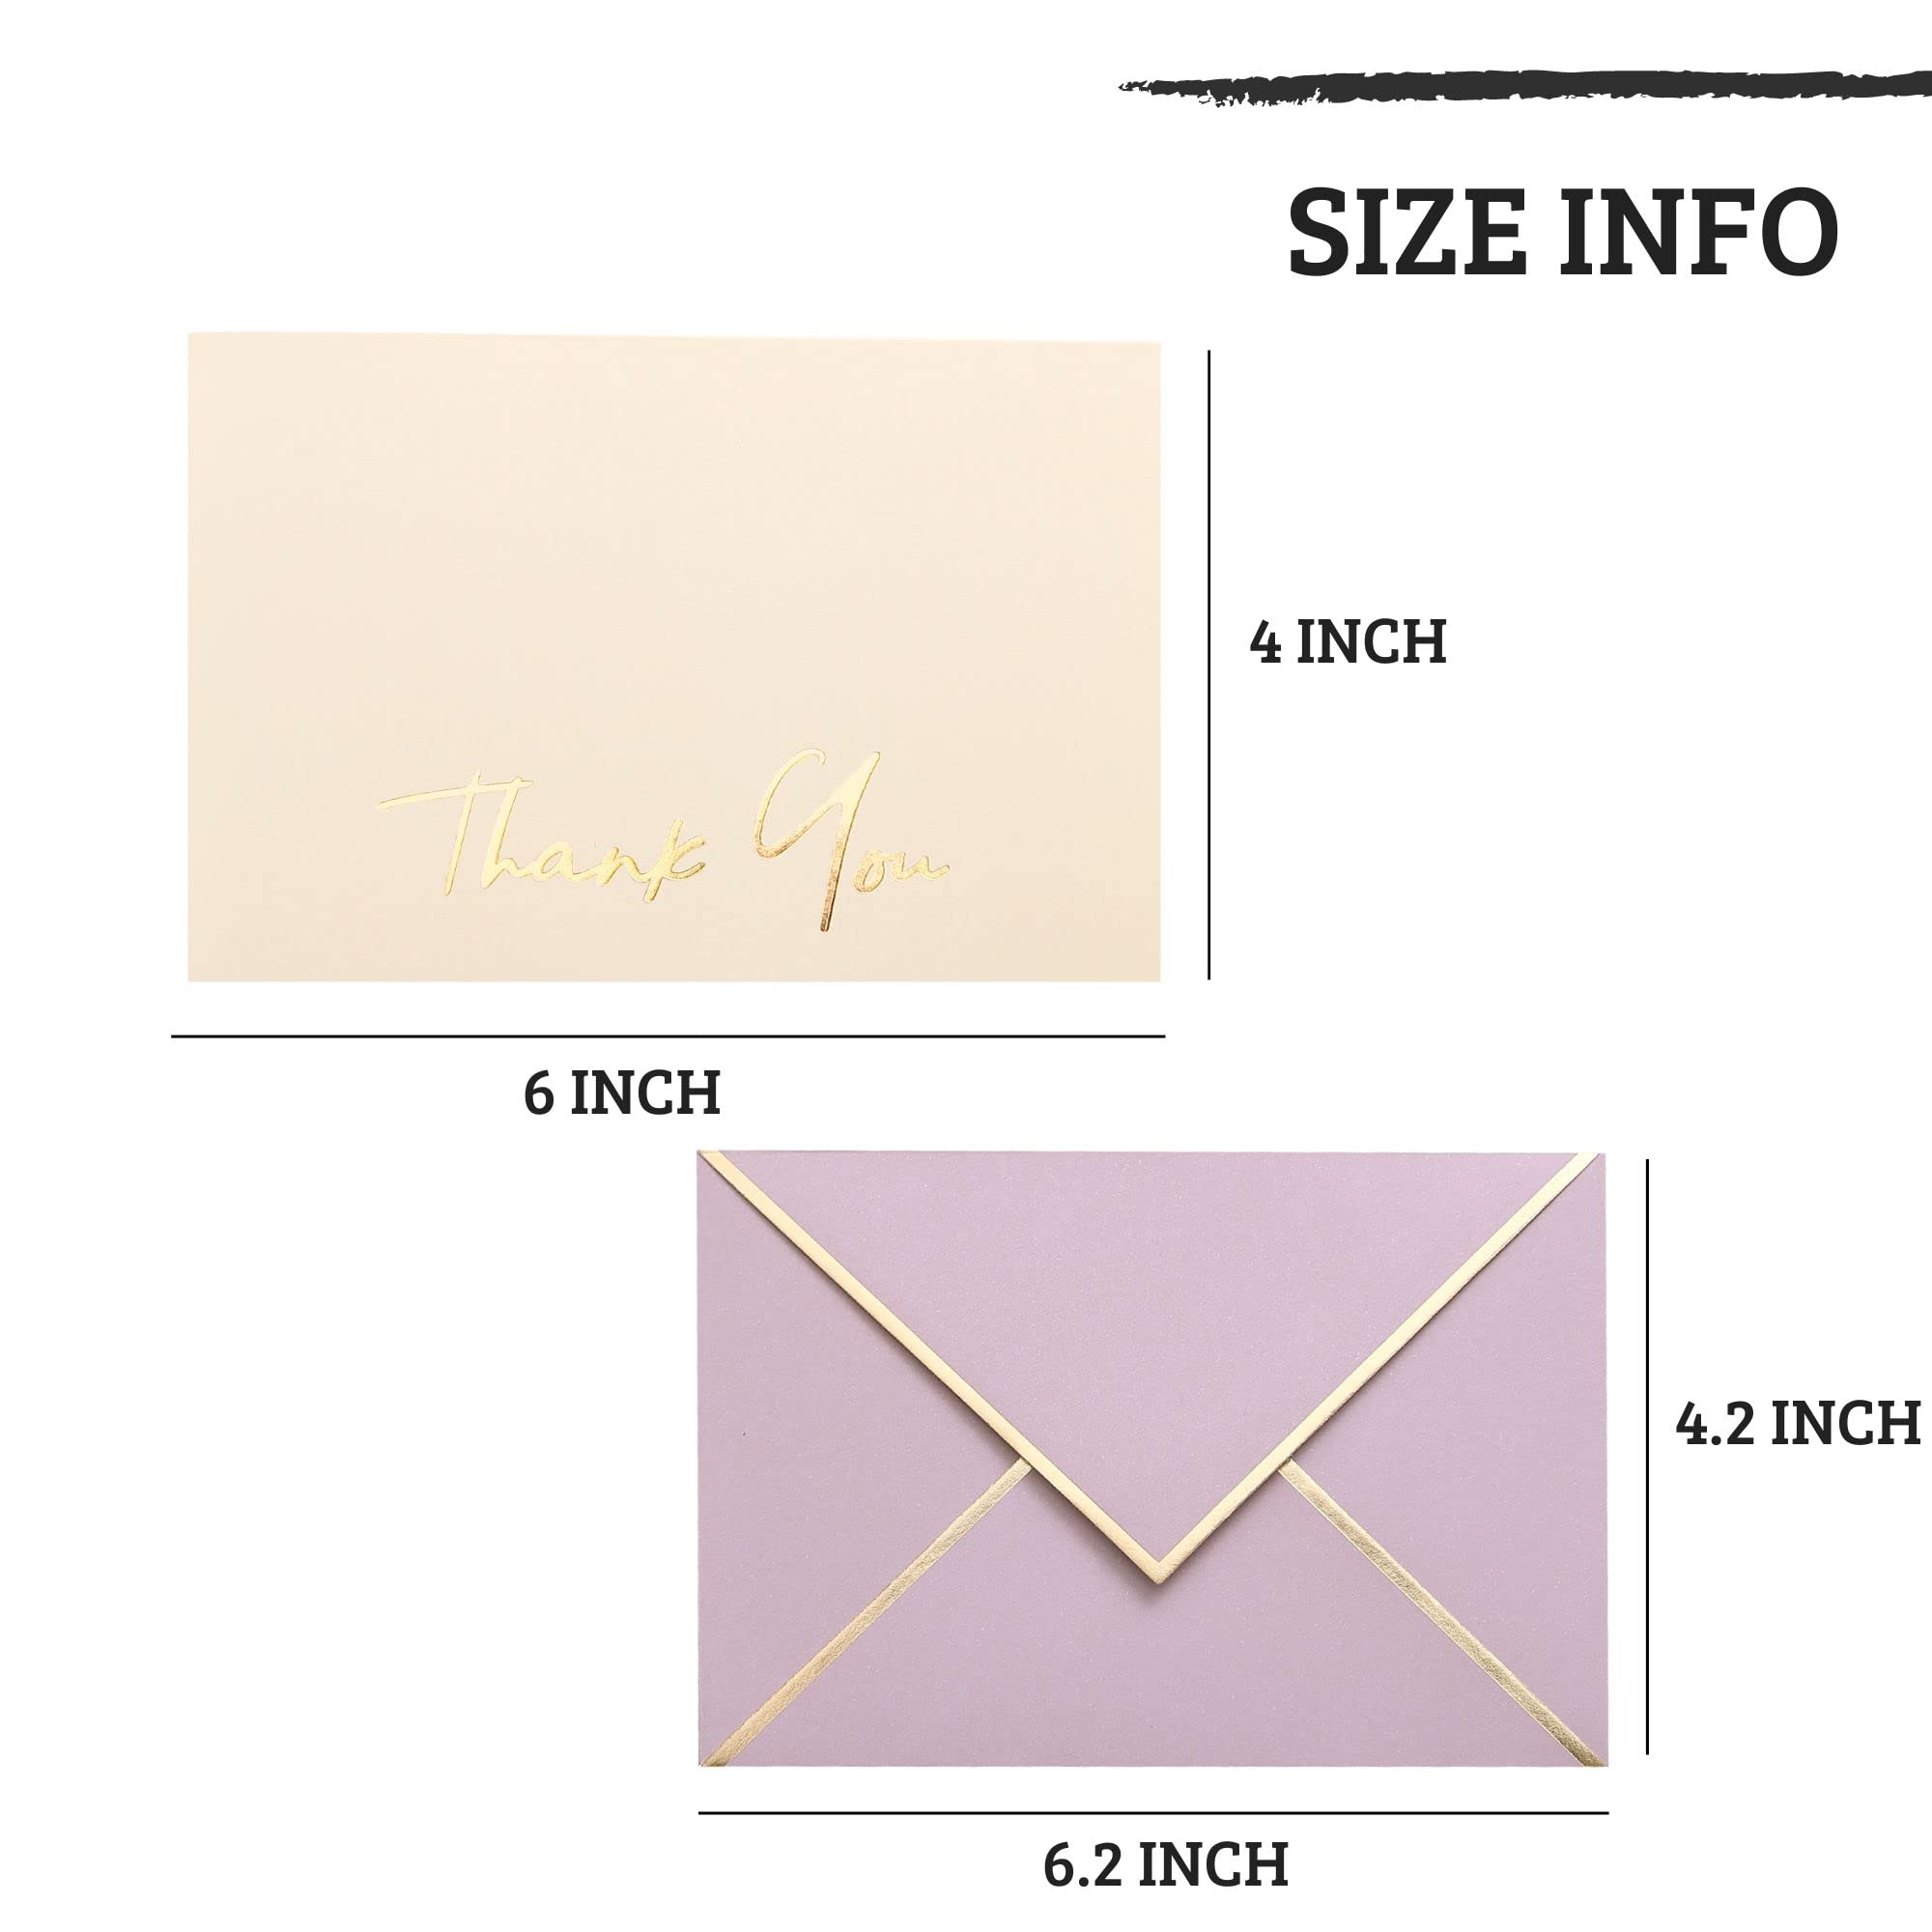 Heavy Duty Thank You Cards with Envelopes - 36 PK - Gold Thank You Notes 4x6 Inches Baby Shower Thank You Cards Wedding Thank You Cards Small Business Graduation Funeral Bridal Shower (Dusty Pink)